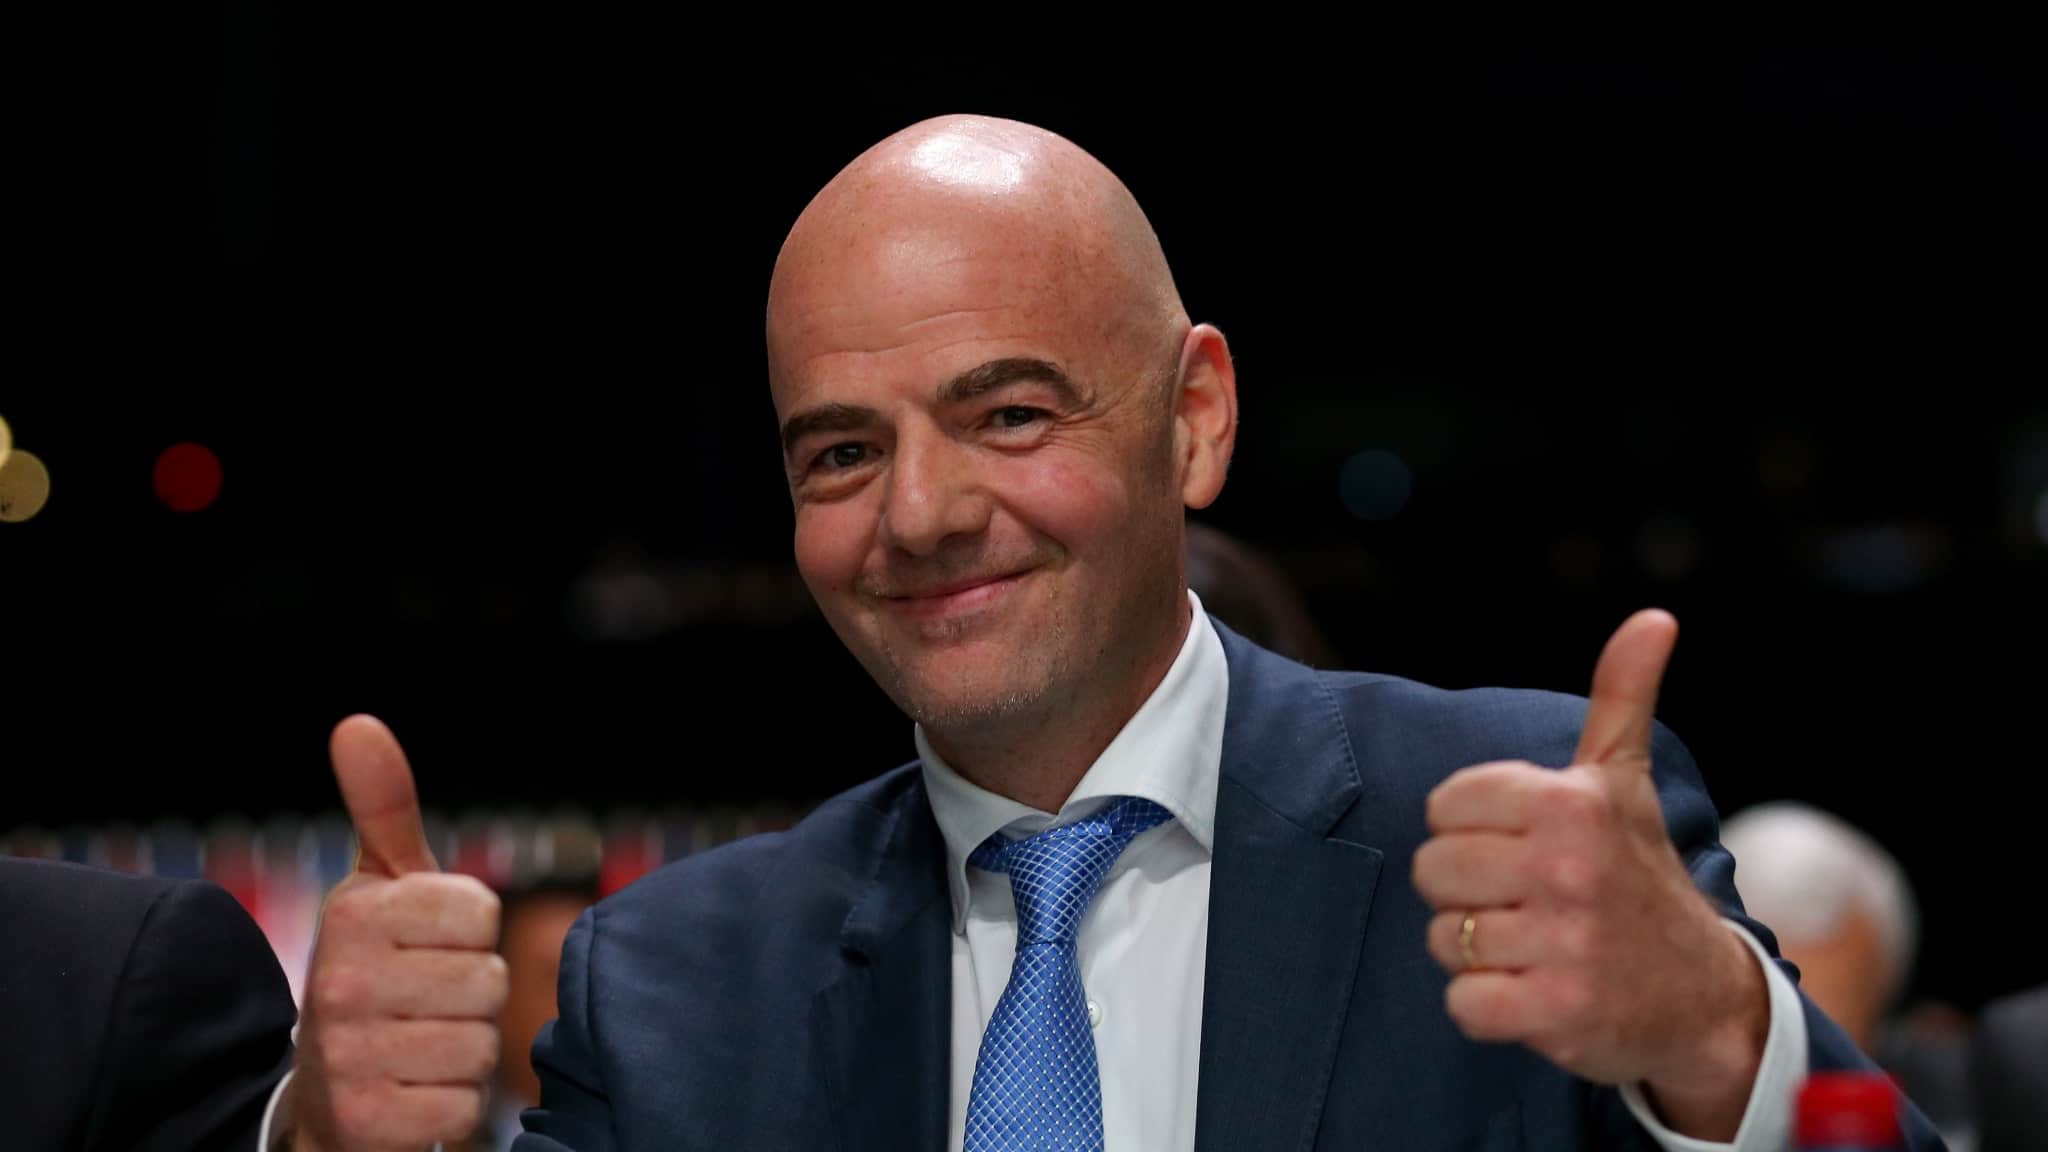 Infantino to continue as FIFA president for 4 more years